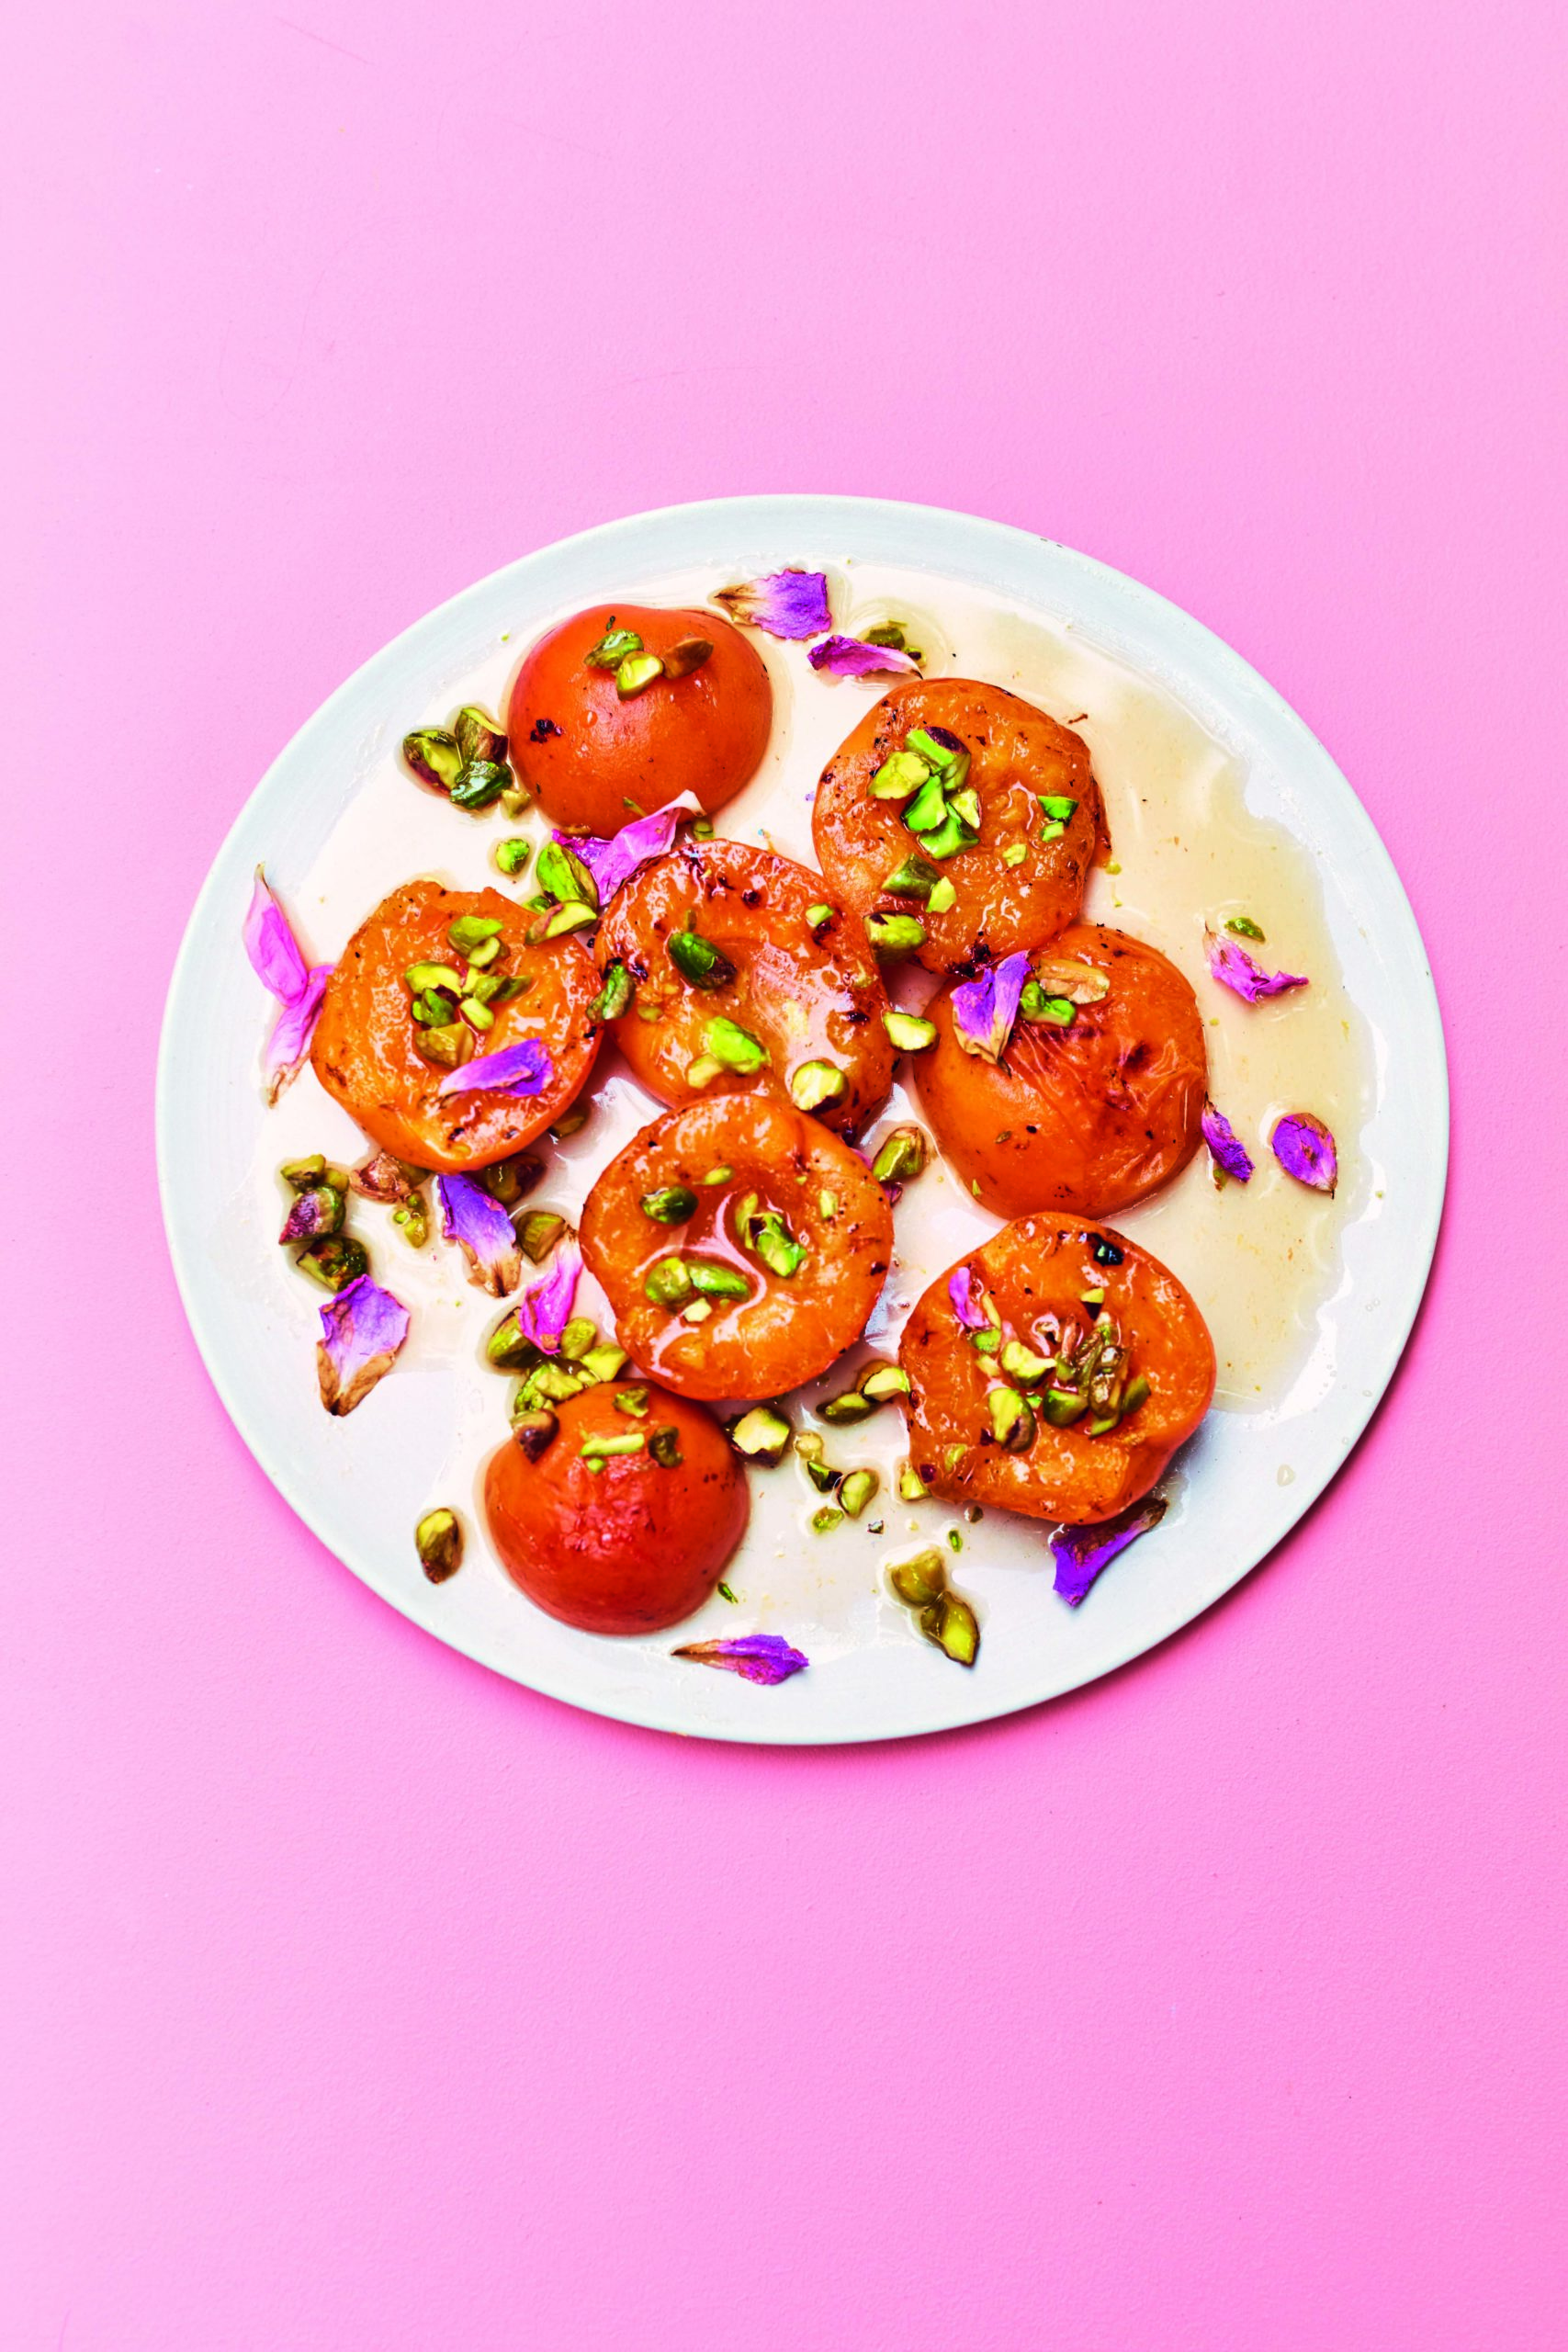 Simply Roasted Apricots With Rose & Pistachio